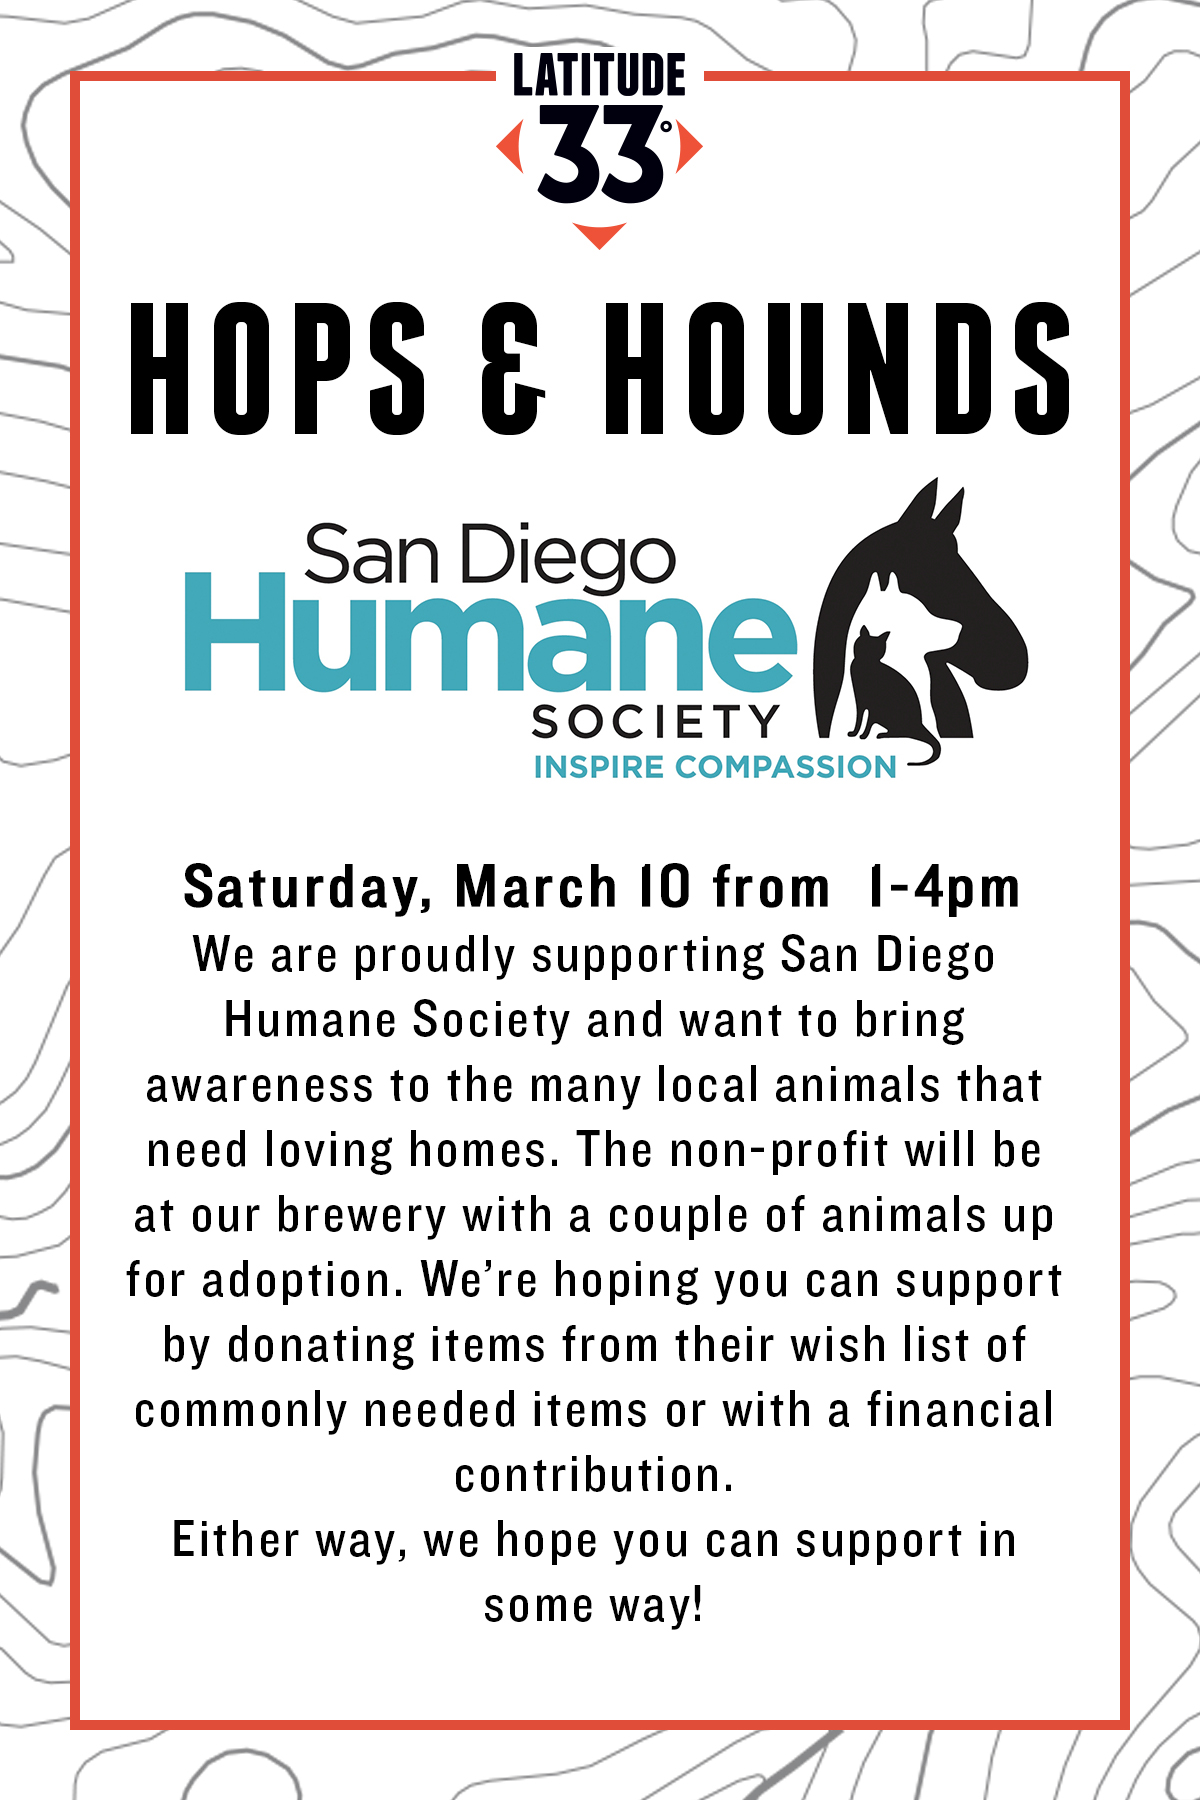 Hops and Hounds